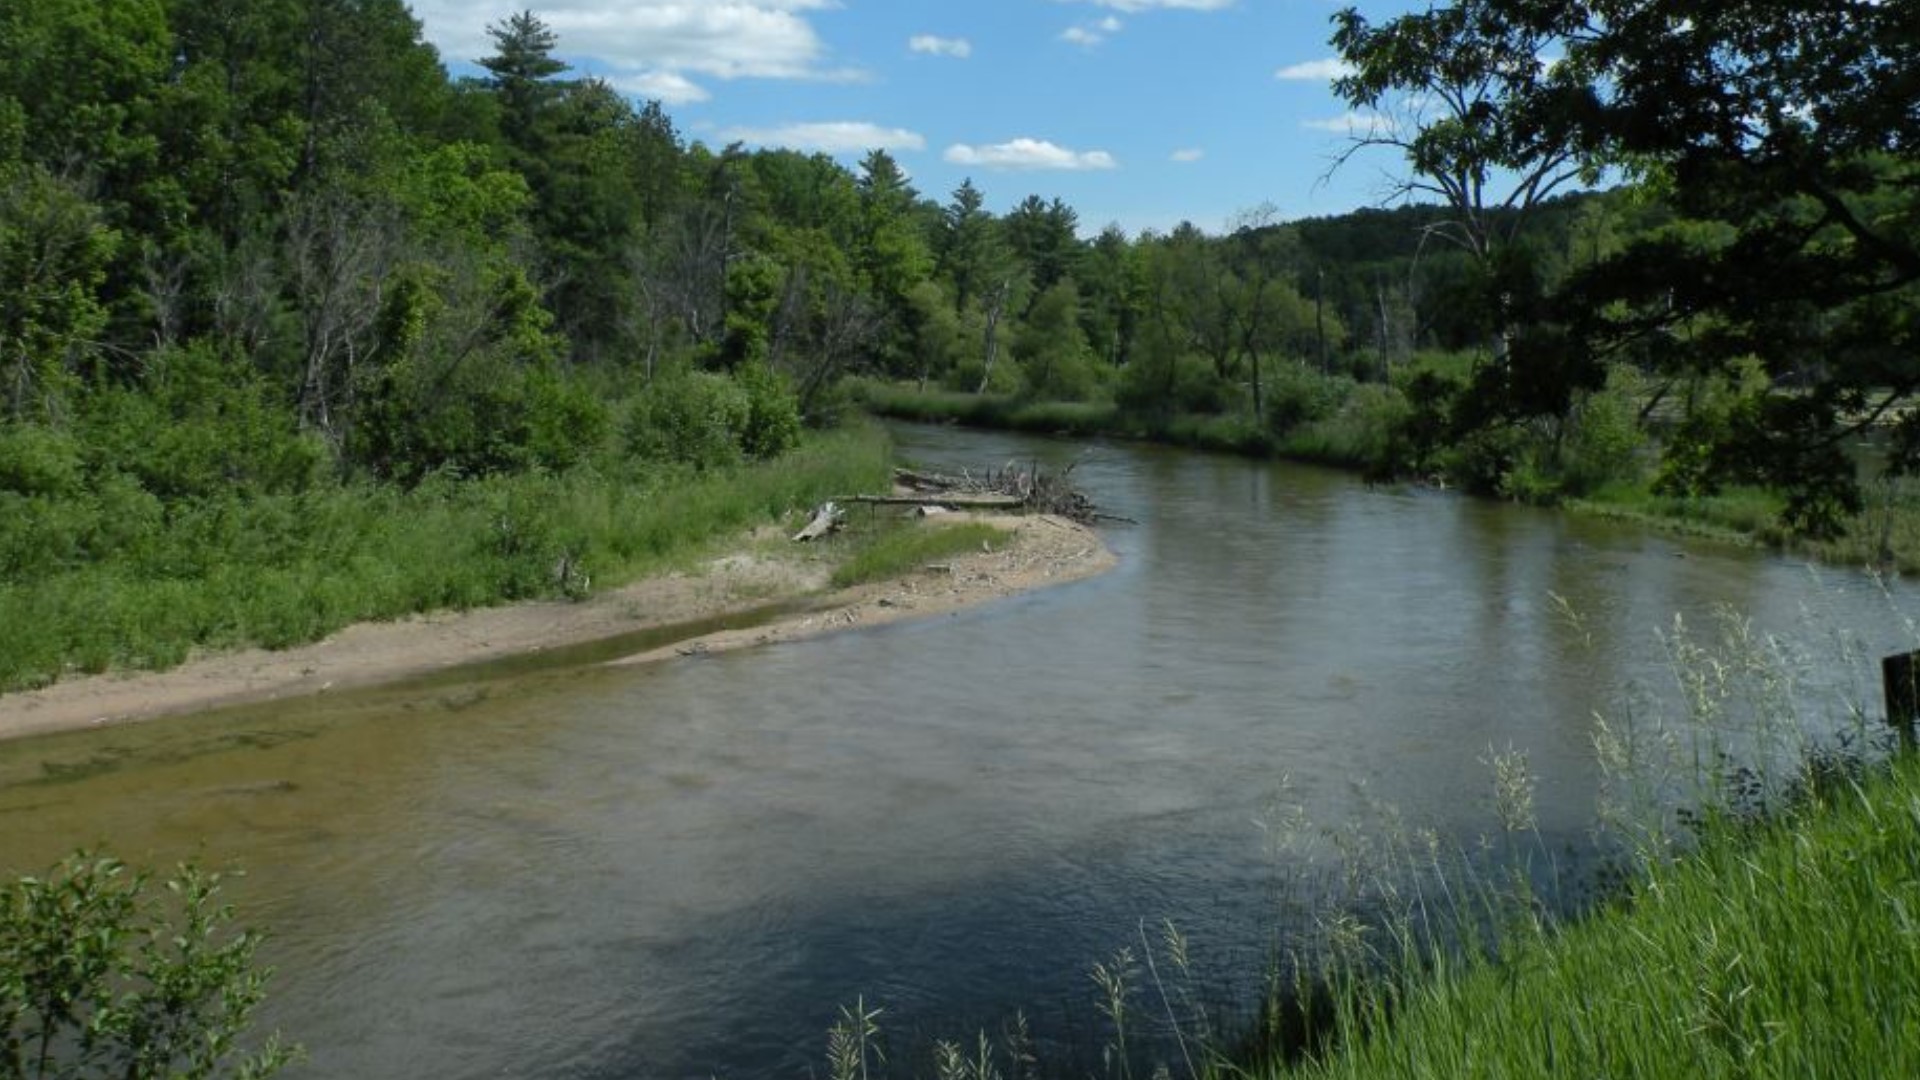 Federal officials say an education plan will be put into place to help curb drunken behavior instead of a ban on alcoholic beverages along sections of three rivers in the Huron-Manistee National Forest in northern Michigan.